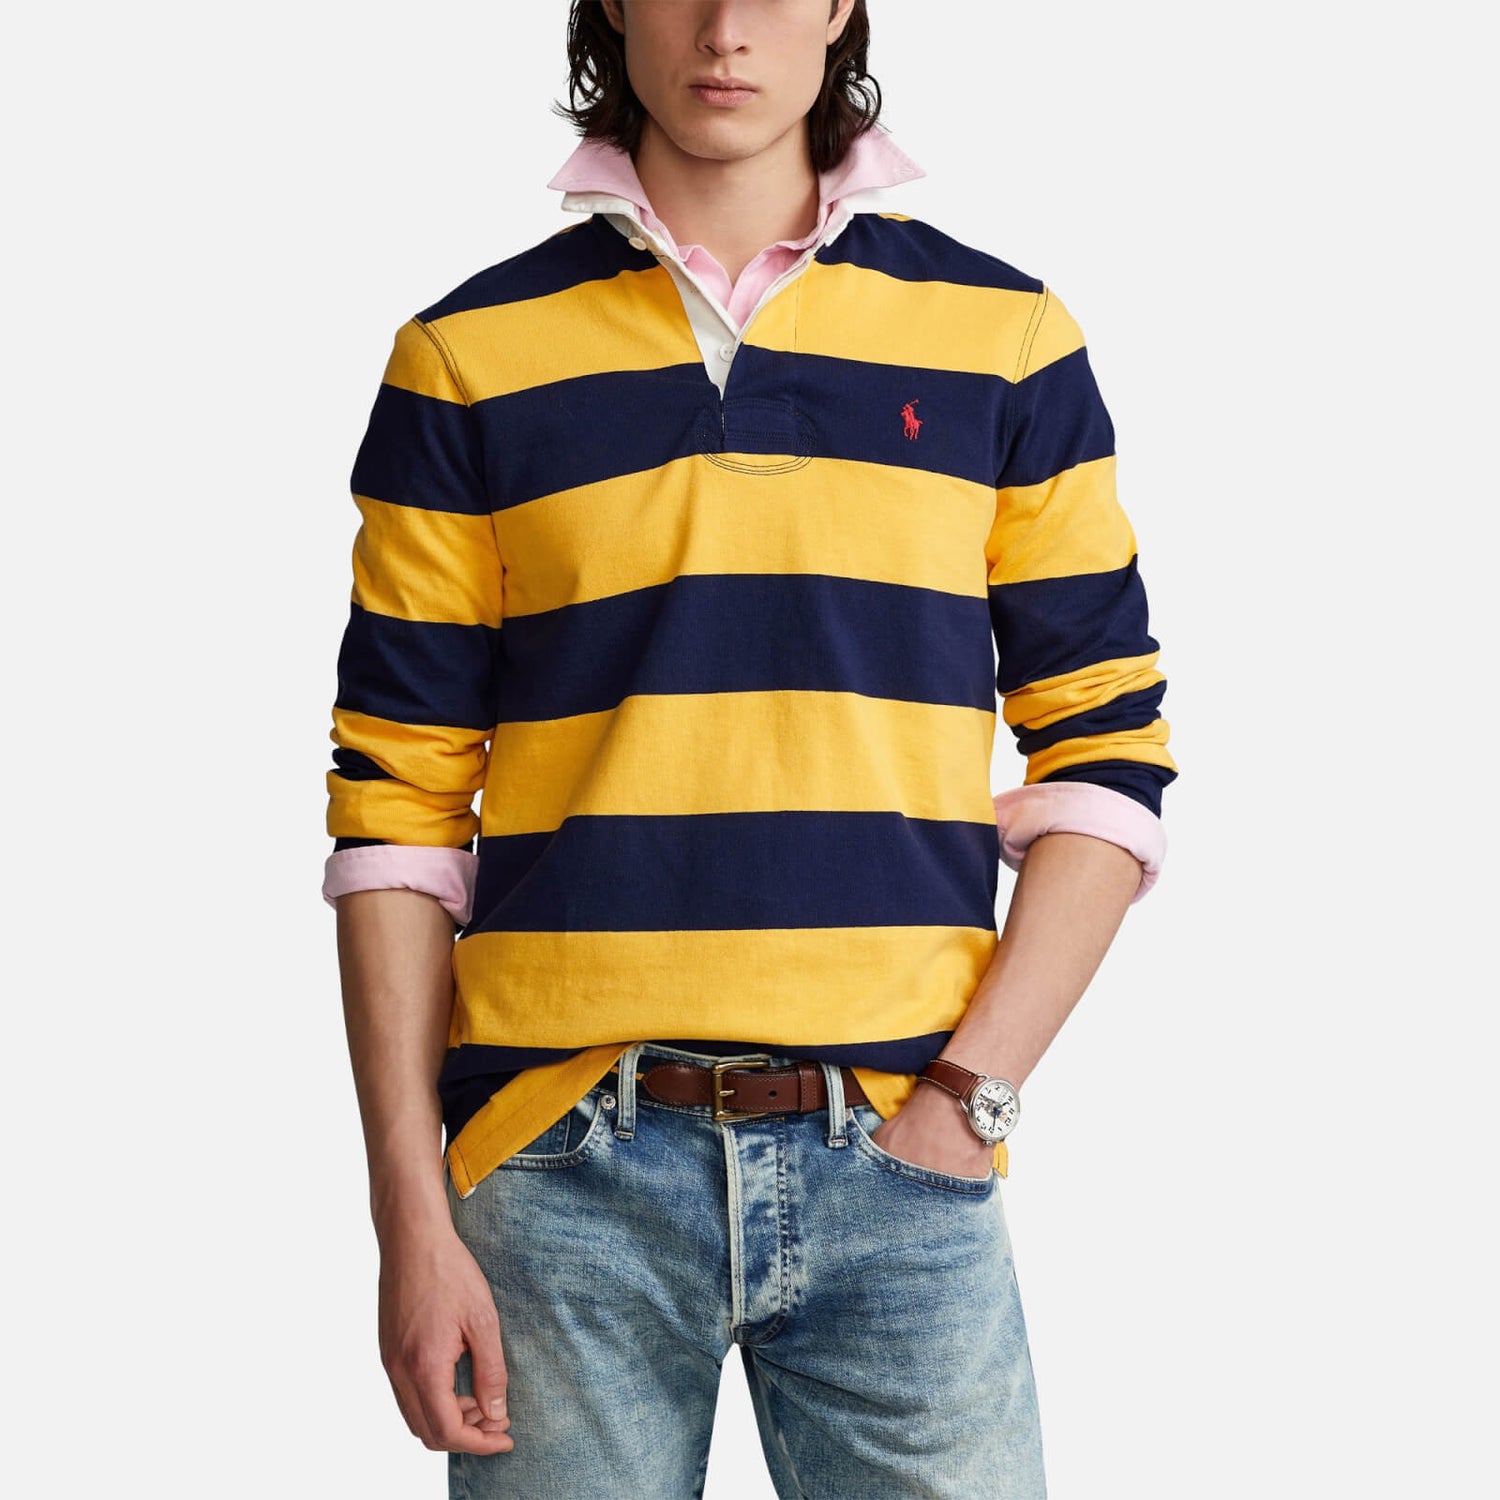 Polo Ralph Lauren Men's Striped Rugby Shirt - French Navy/Gold Bugle - S